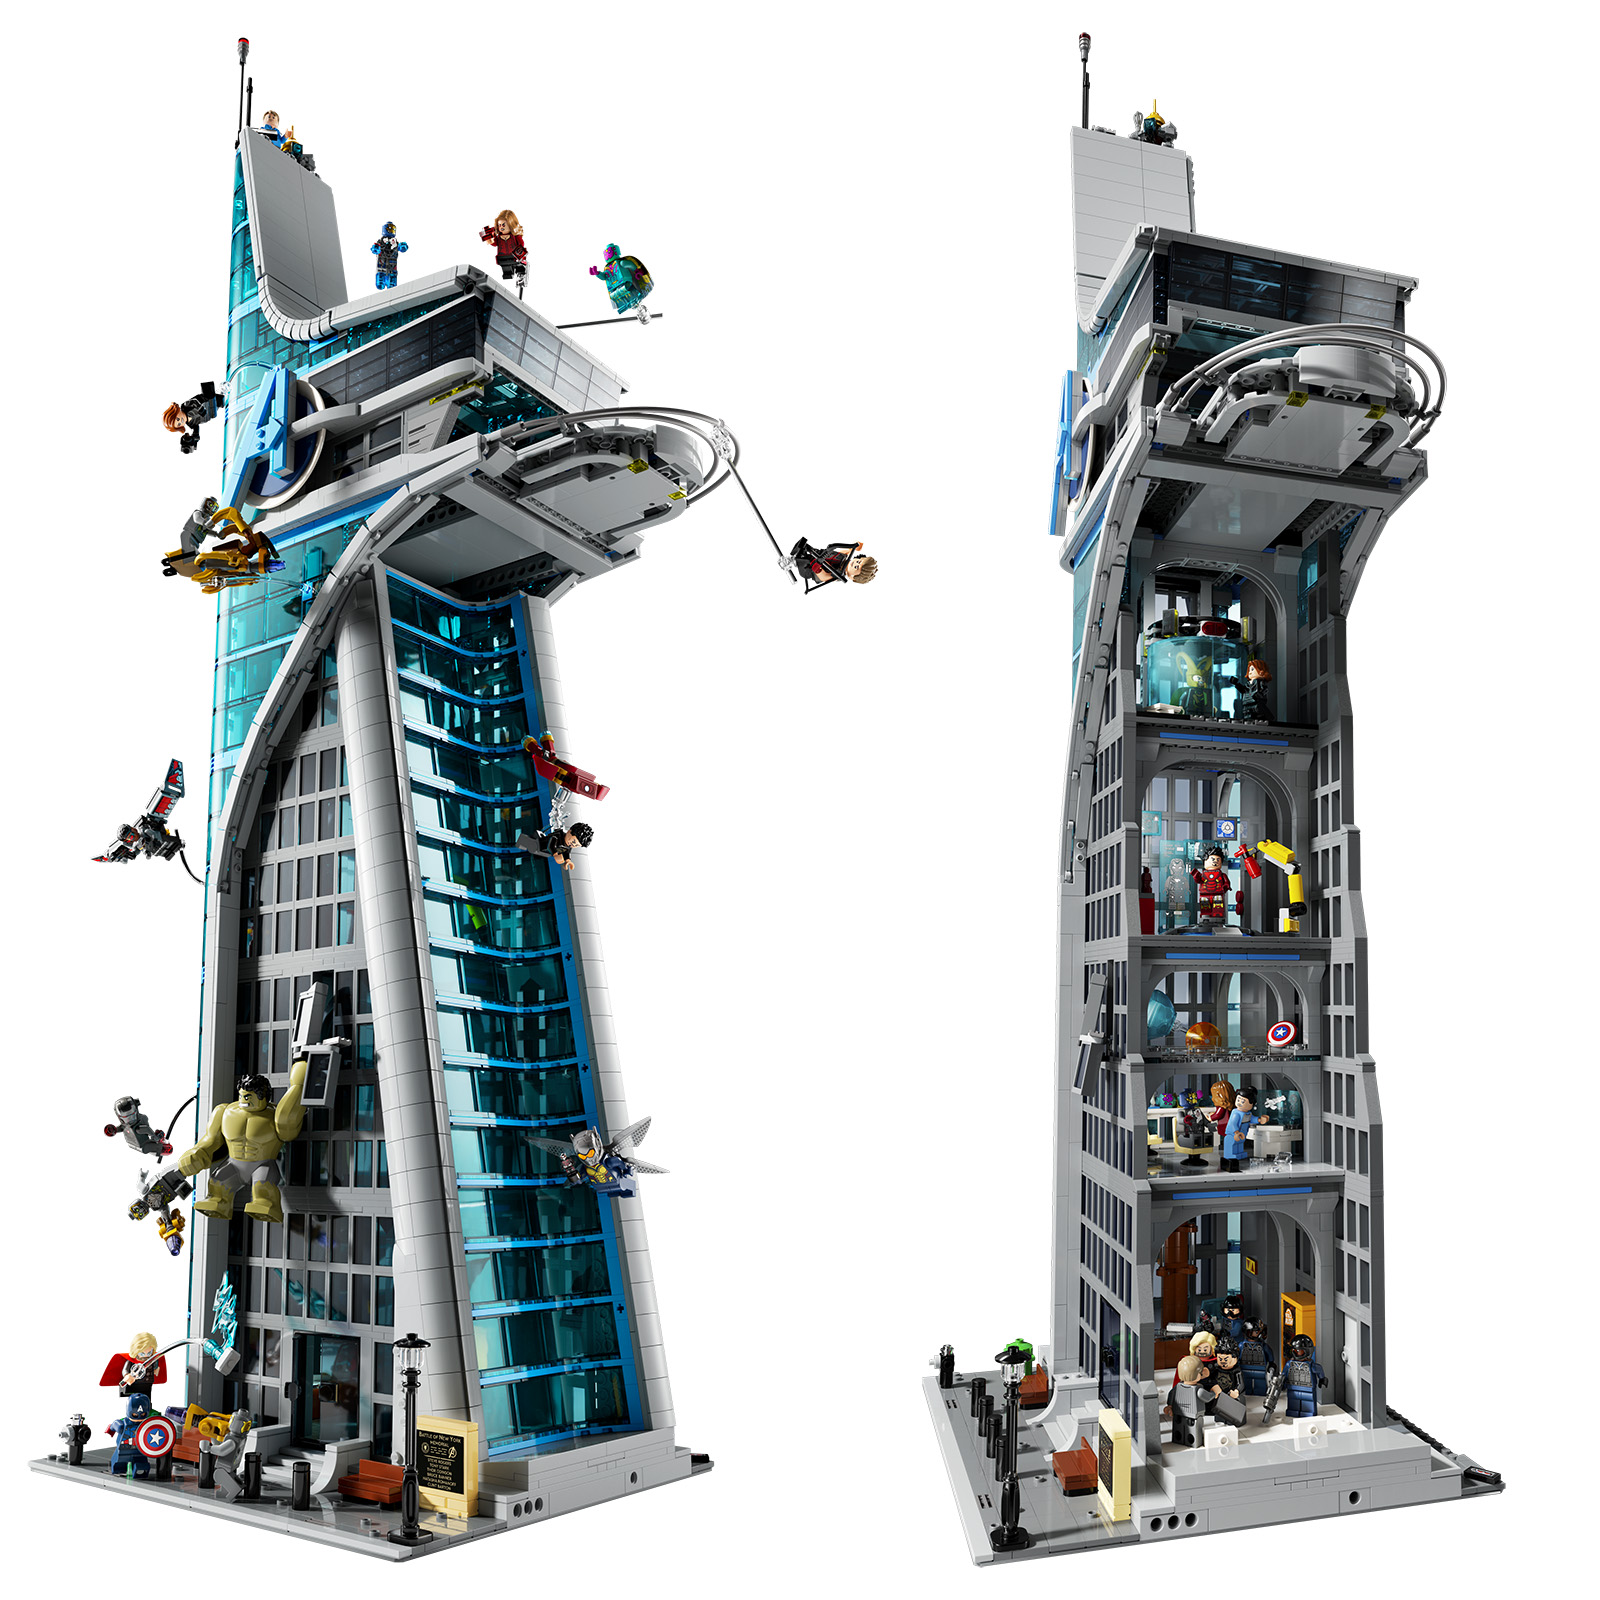 LEGO Avengers Tower: Features, price, where to buy, and all you need to know